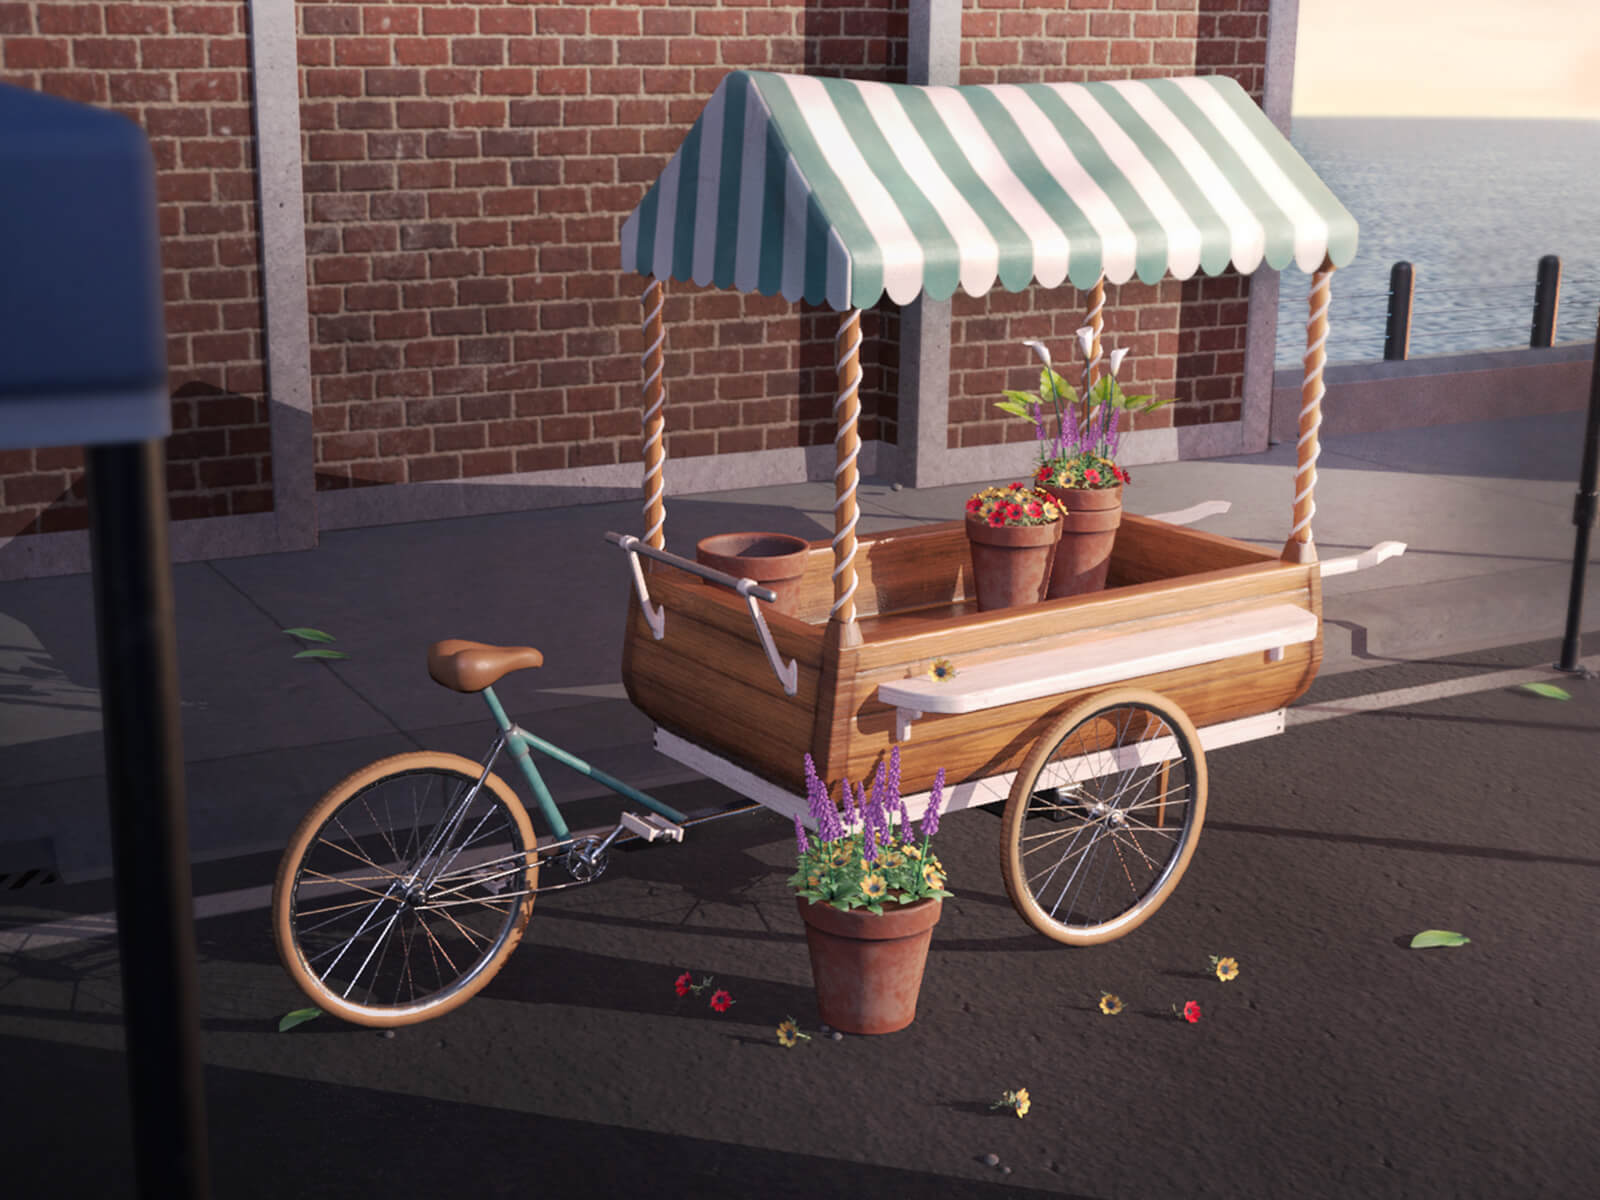 A bicycle with a cart attached carrying potted flowers